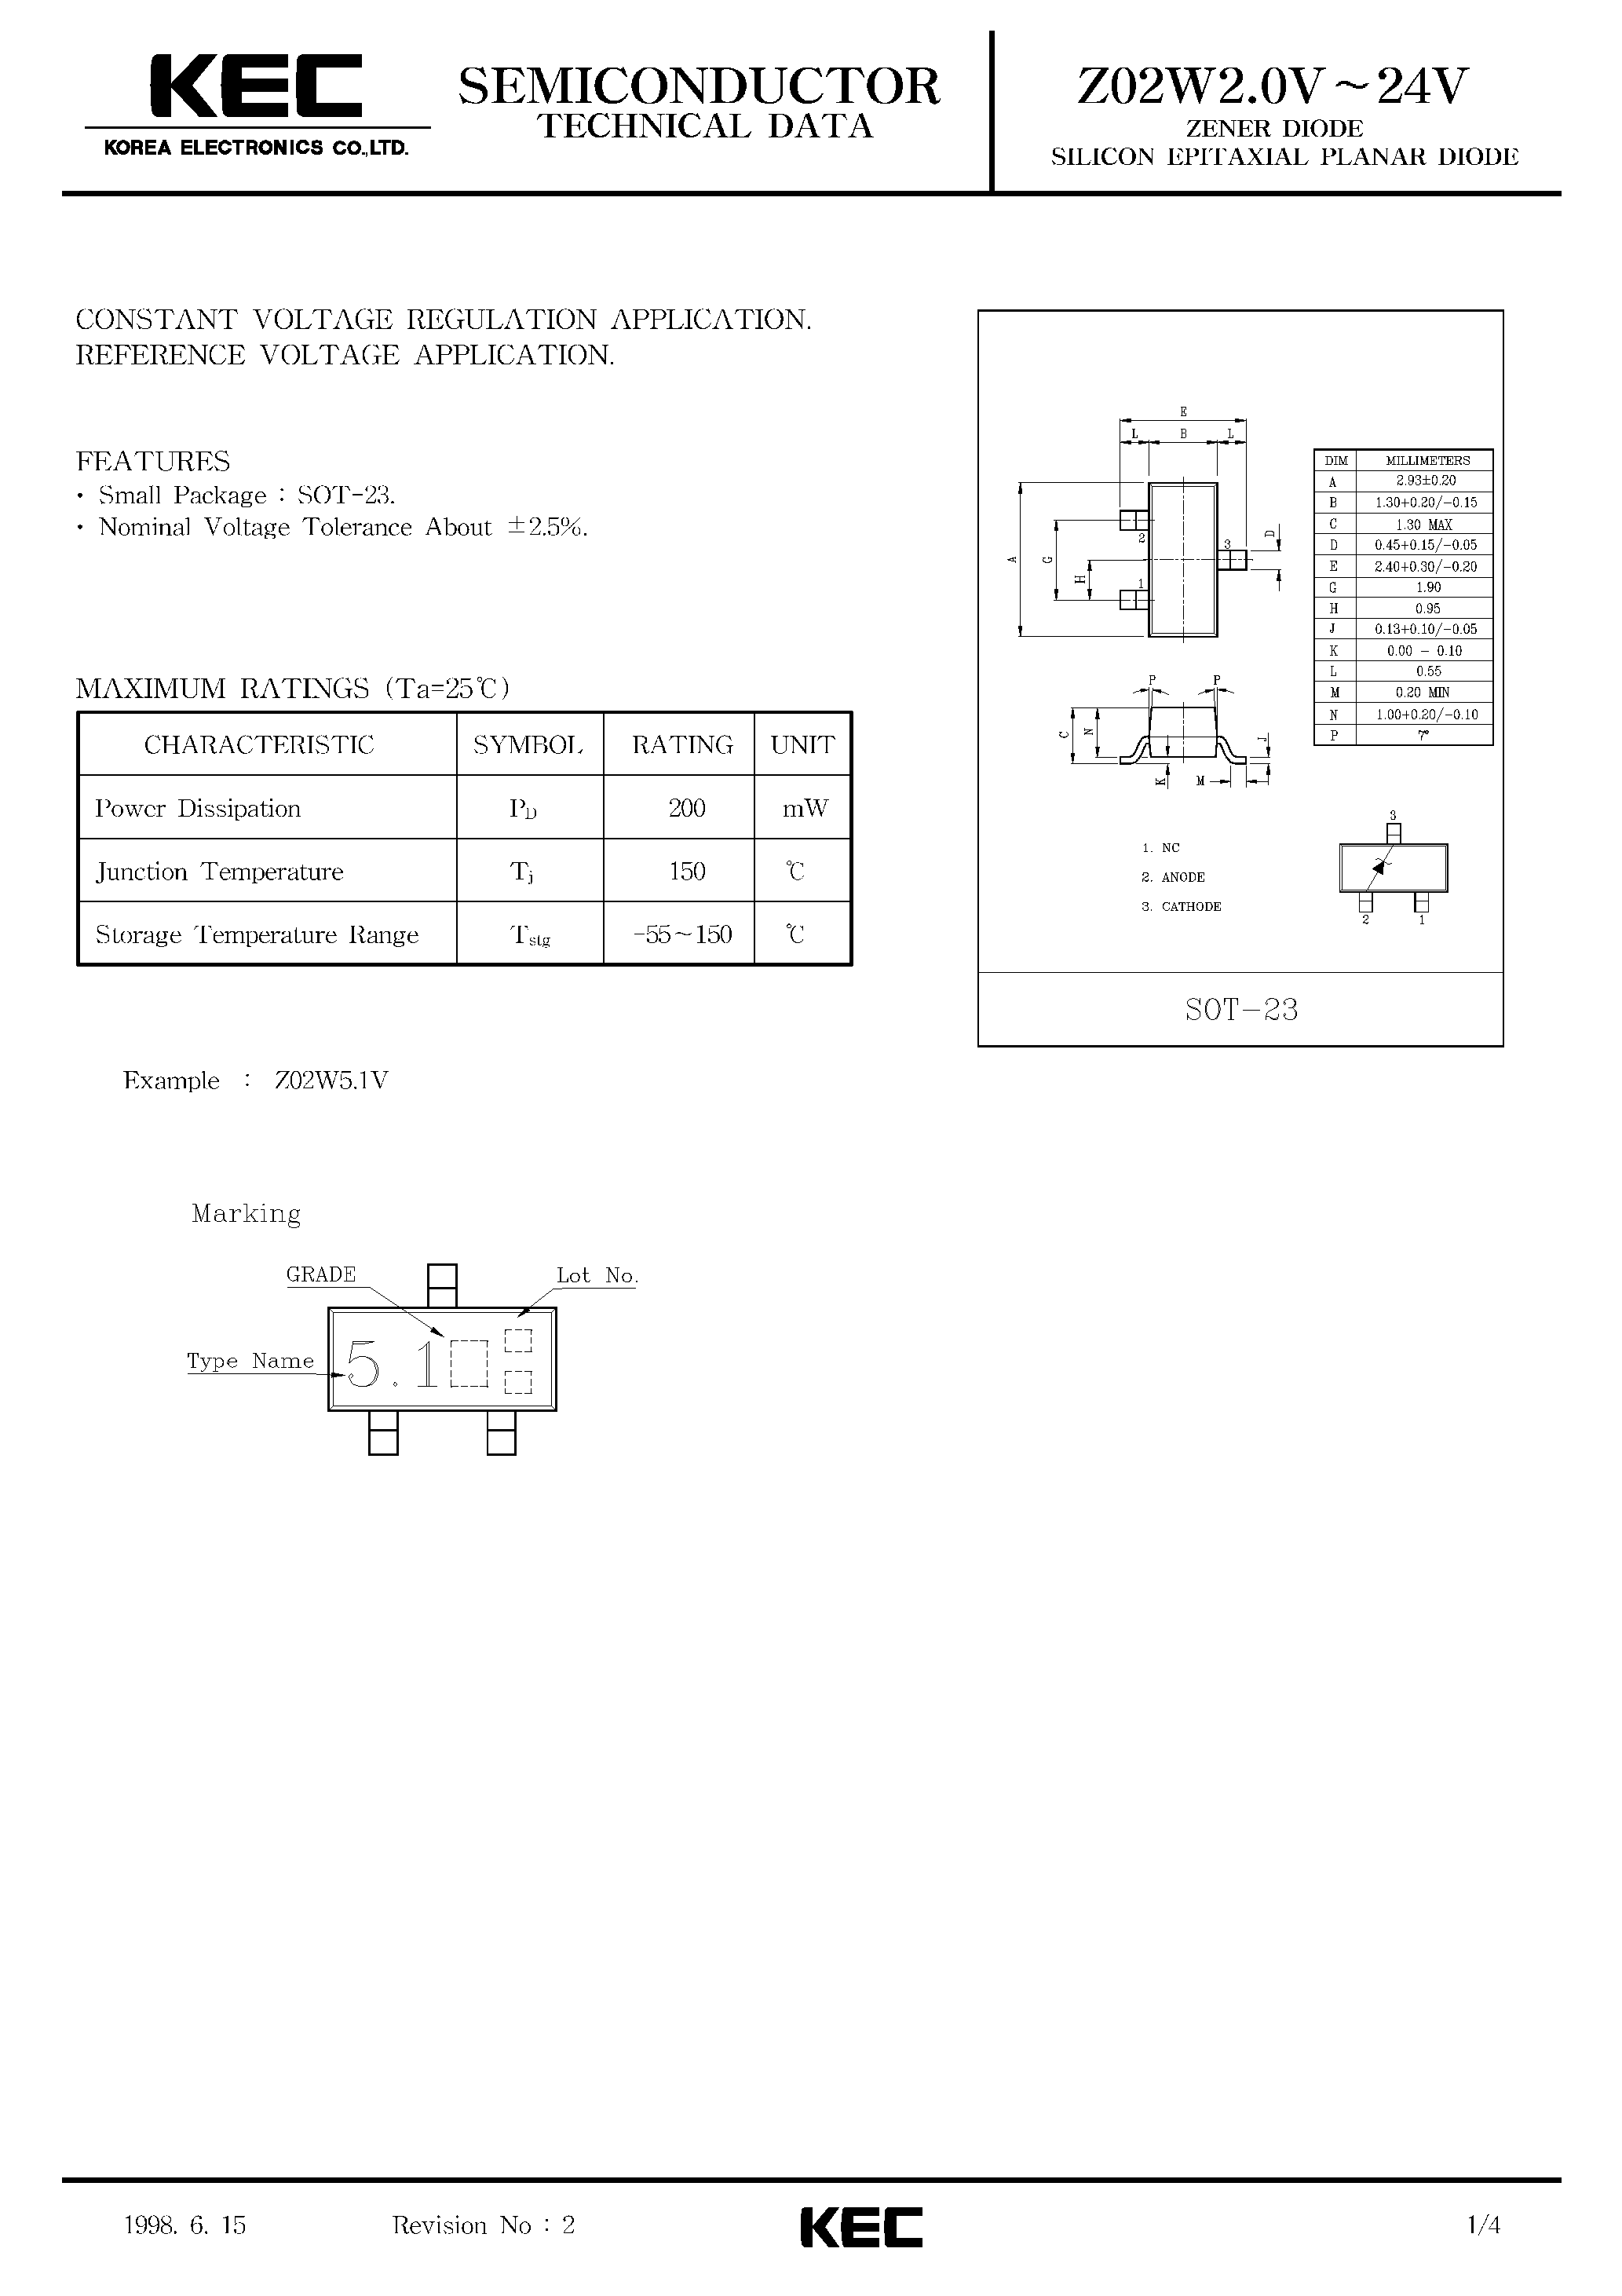 Datasheet Z02W3.9V - ZENER DIODE SILICON EPITAXIAL PLANAR DIODE page 1